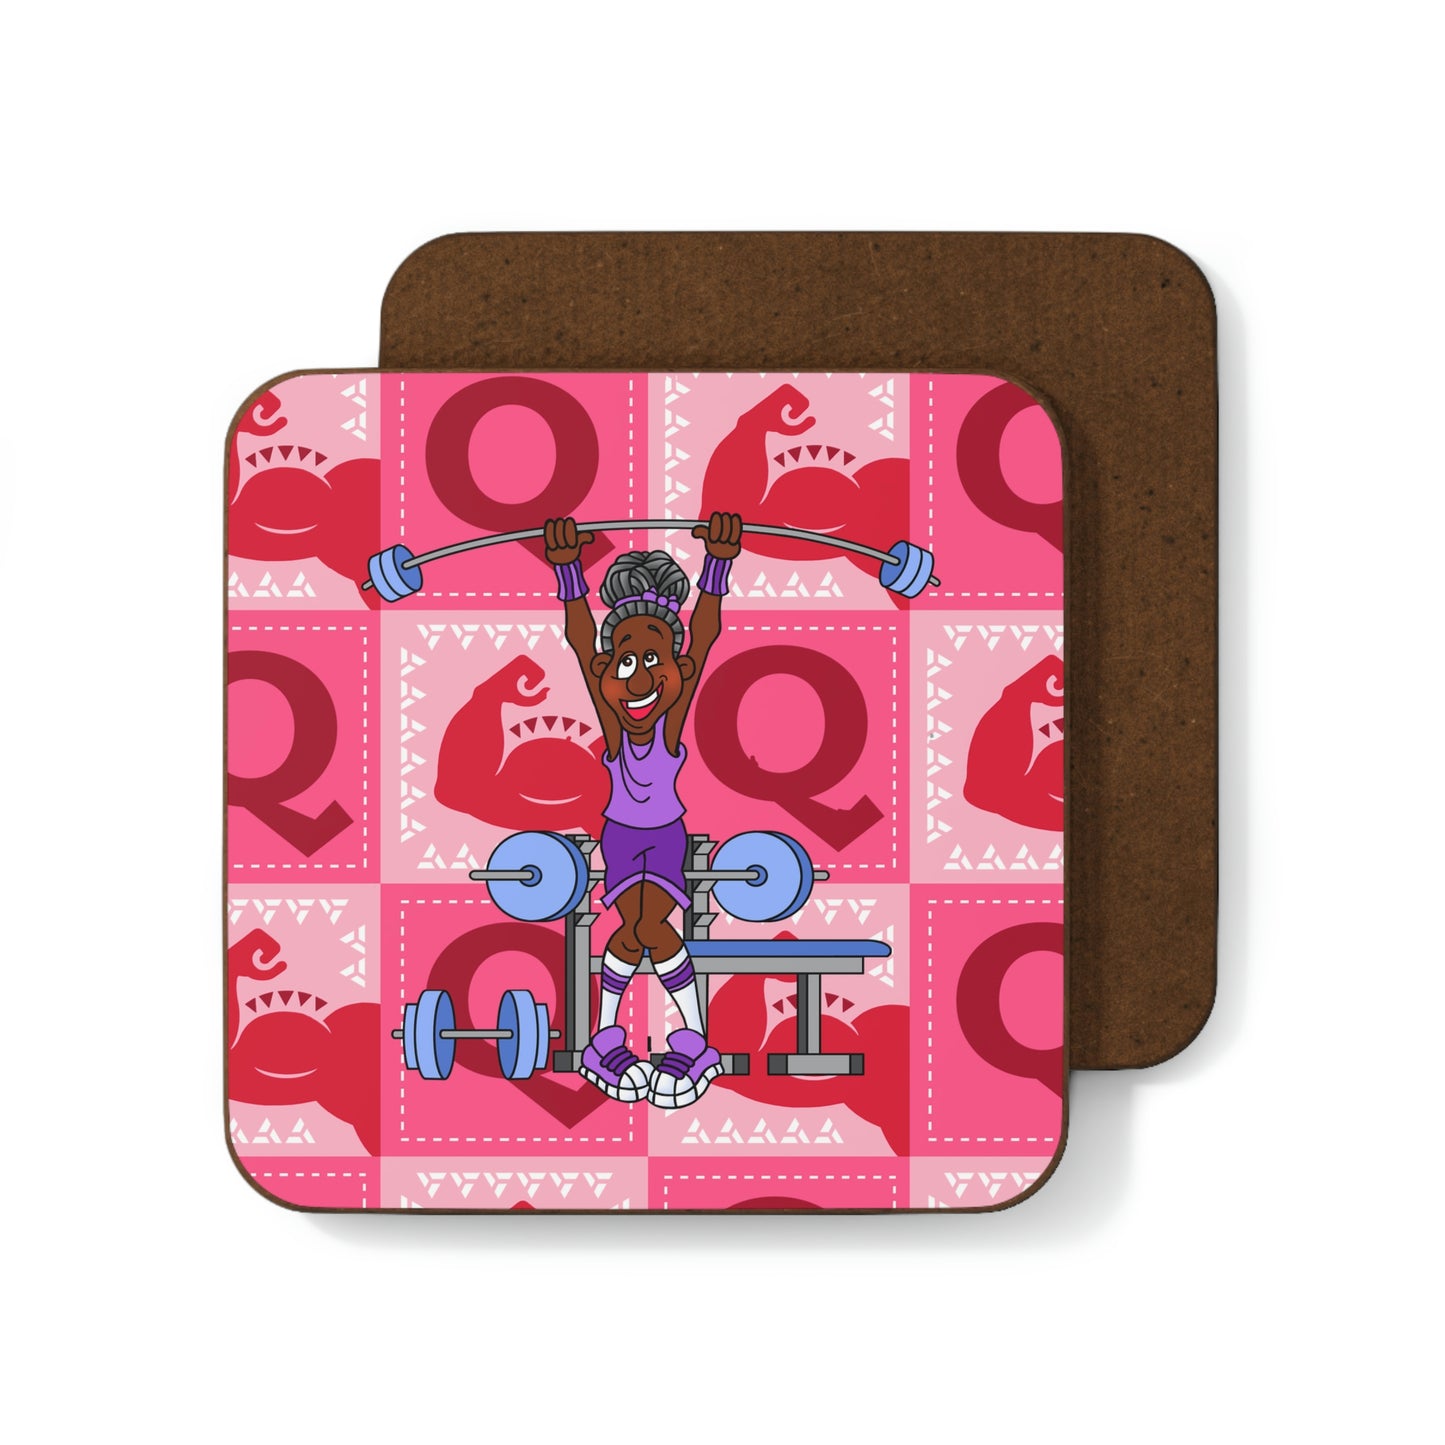 The Bible as Simple as ABC Q Hardboard Back Coaster